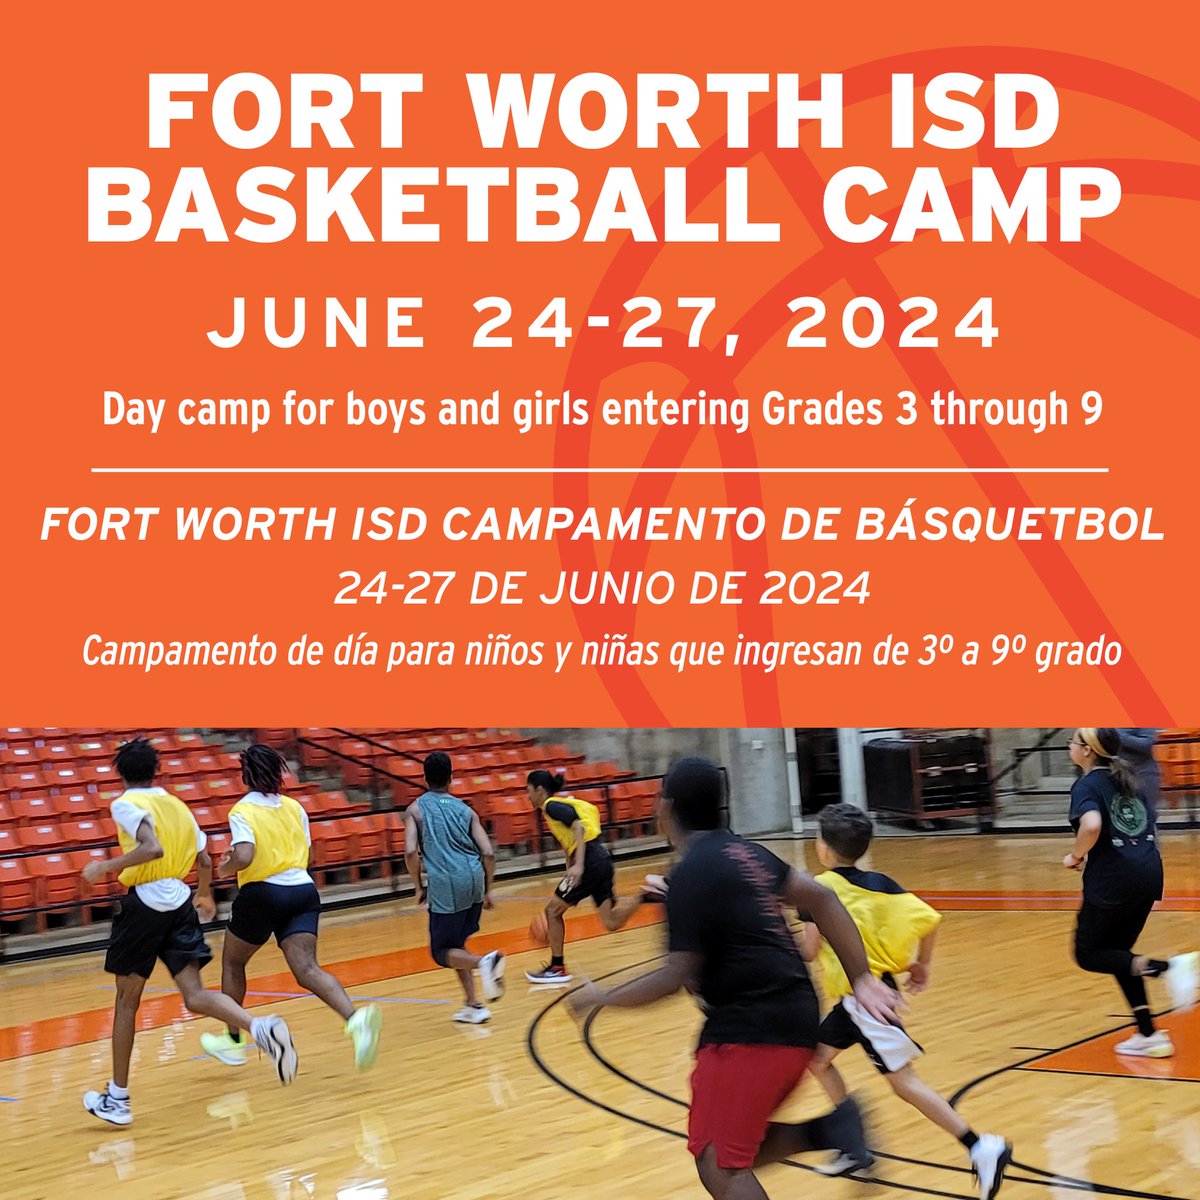 Summer is right around the corner! Register today to secure your spot at FWISD basketball camp June 24-27! Limited spots are available. More information: fwisd.org/basketballcamp